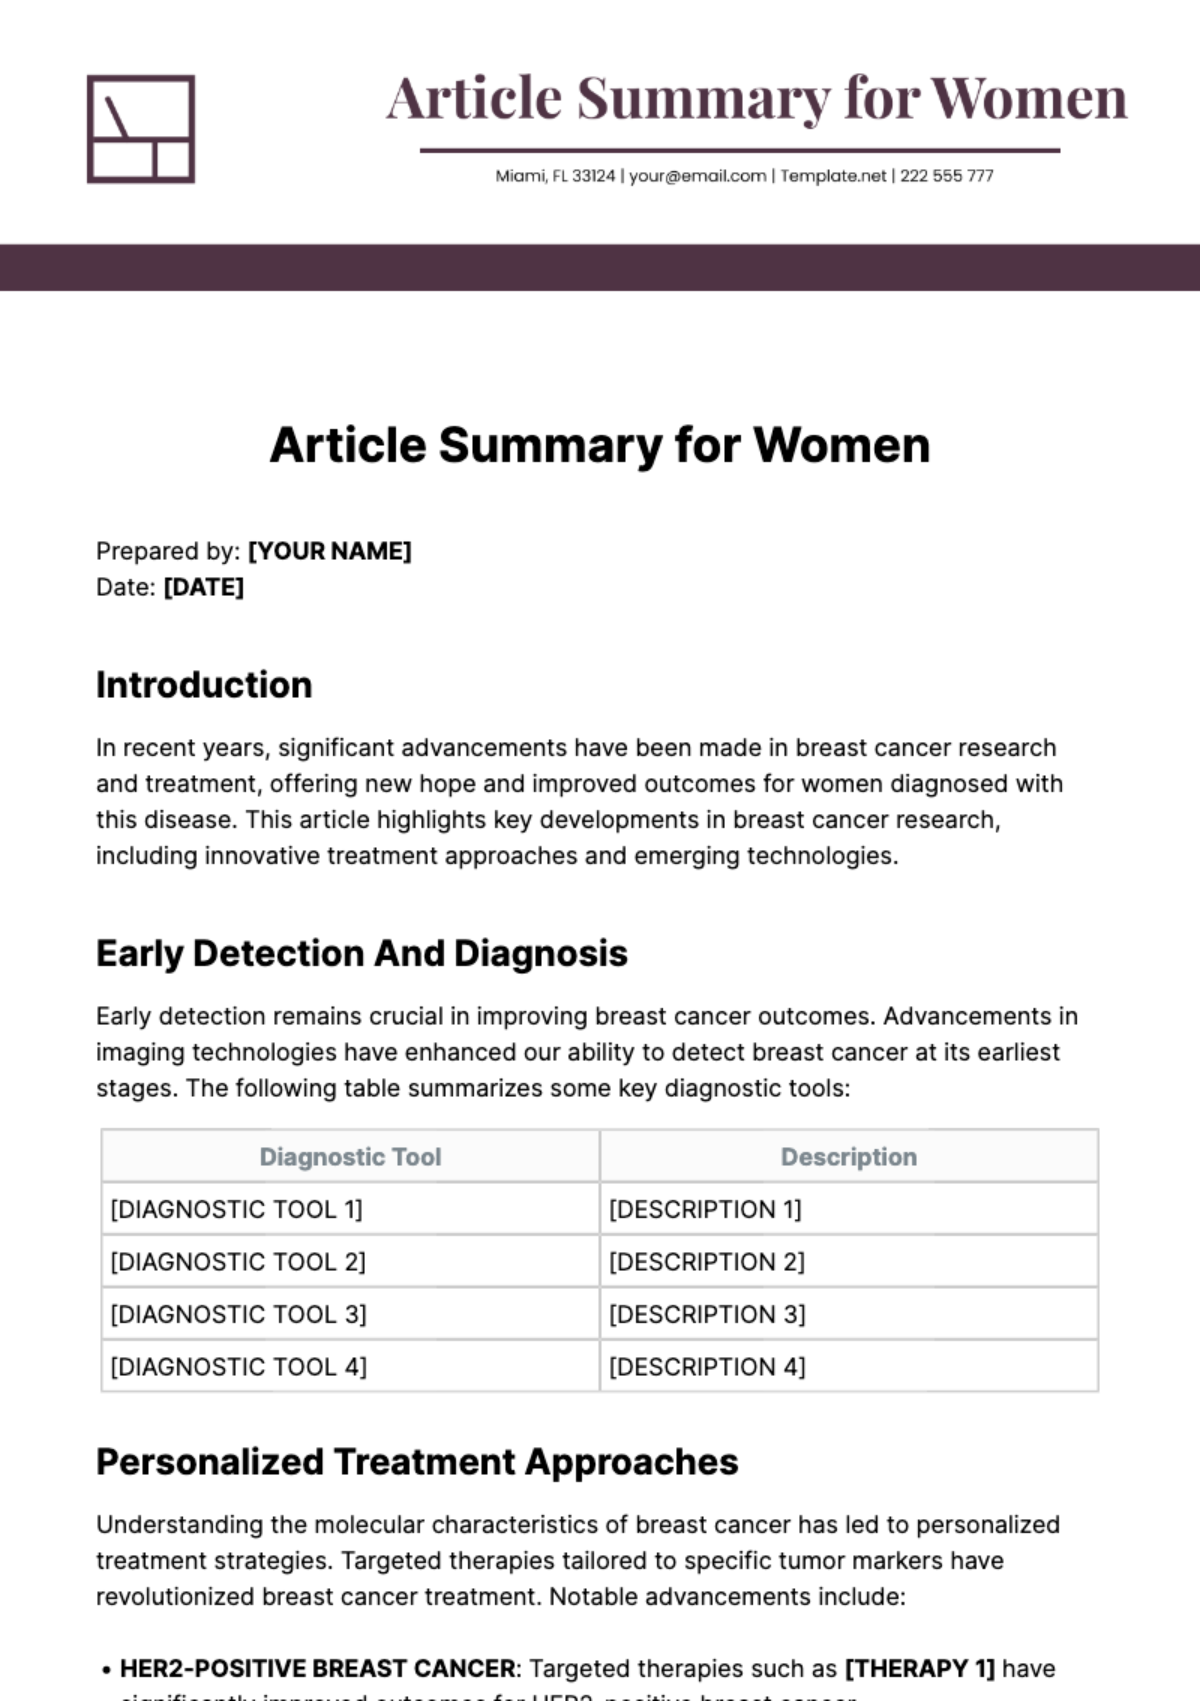 Article Summary for Women Template